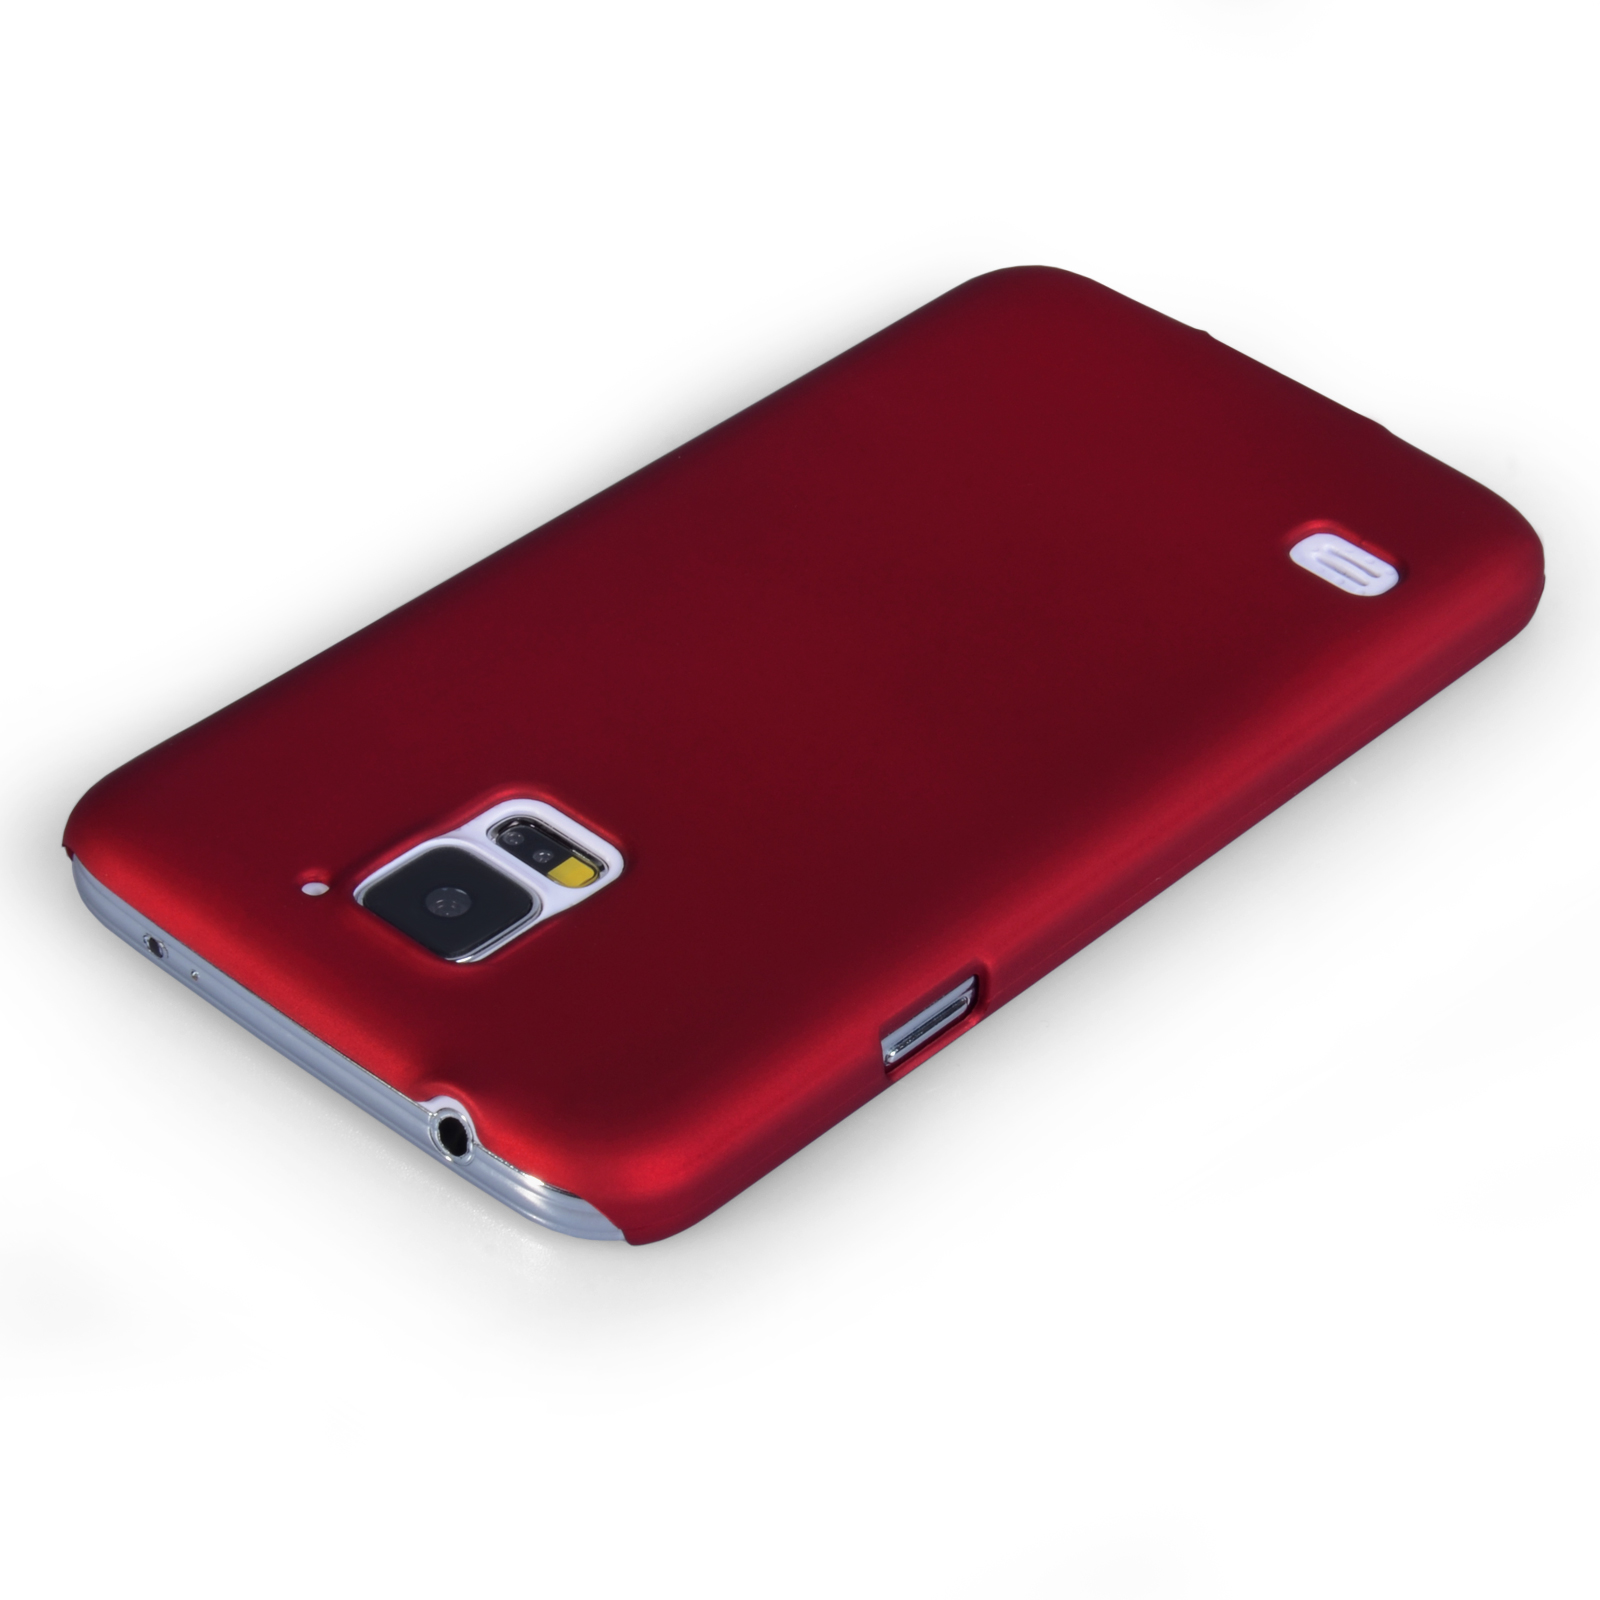 YouSave Accessories Samsung Galaxy S5 Hard Hybrid Case - Red